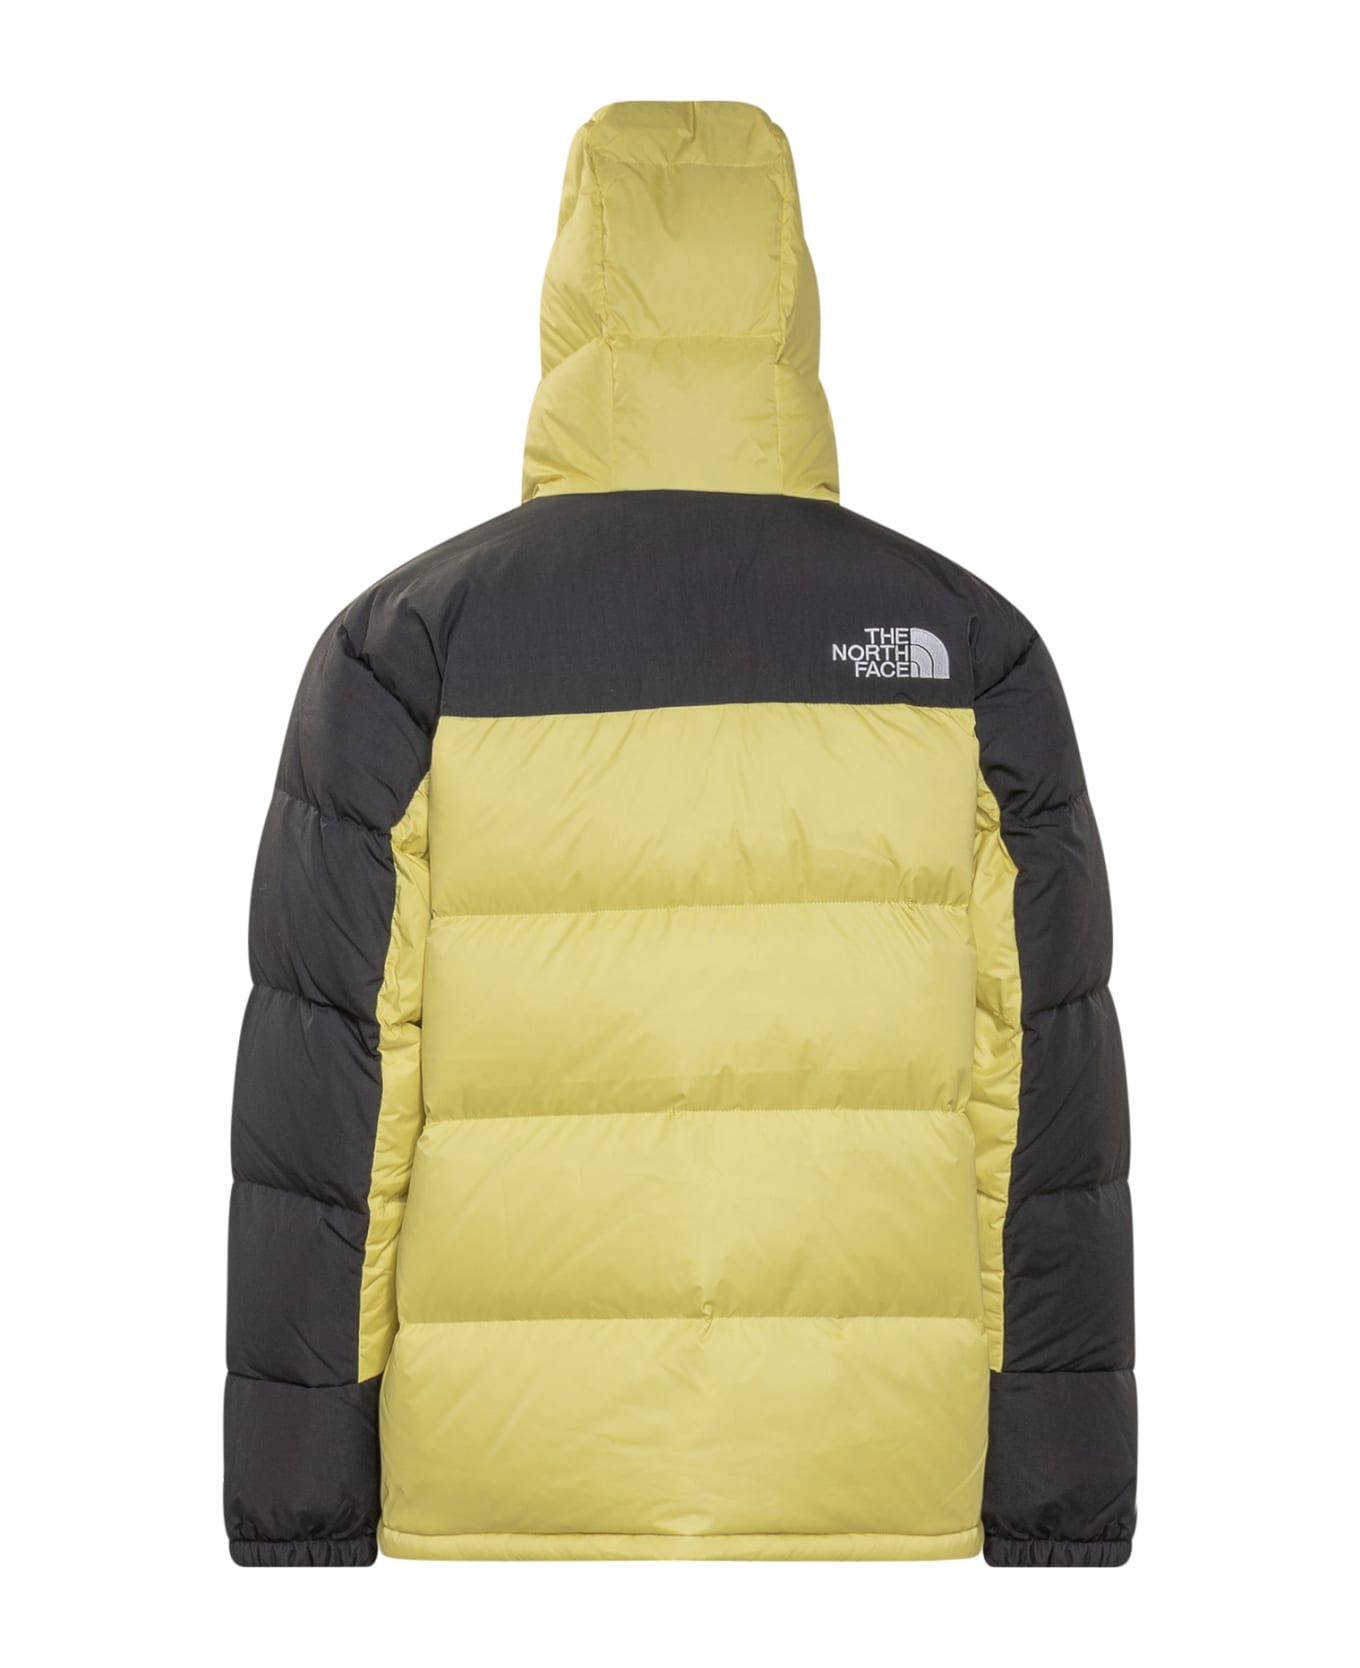 The North Face Hooded Down Jacket - YELLOWTAIL ダウンジャケット